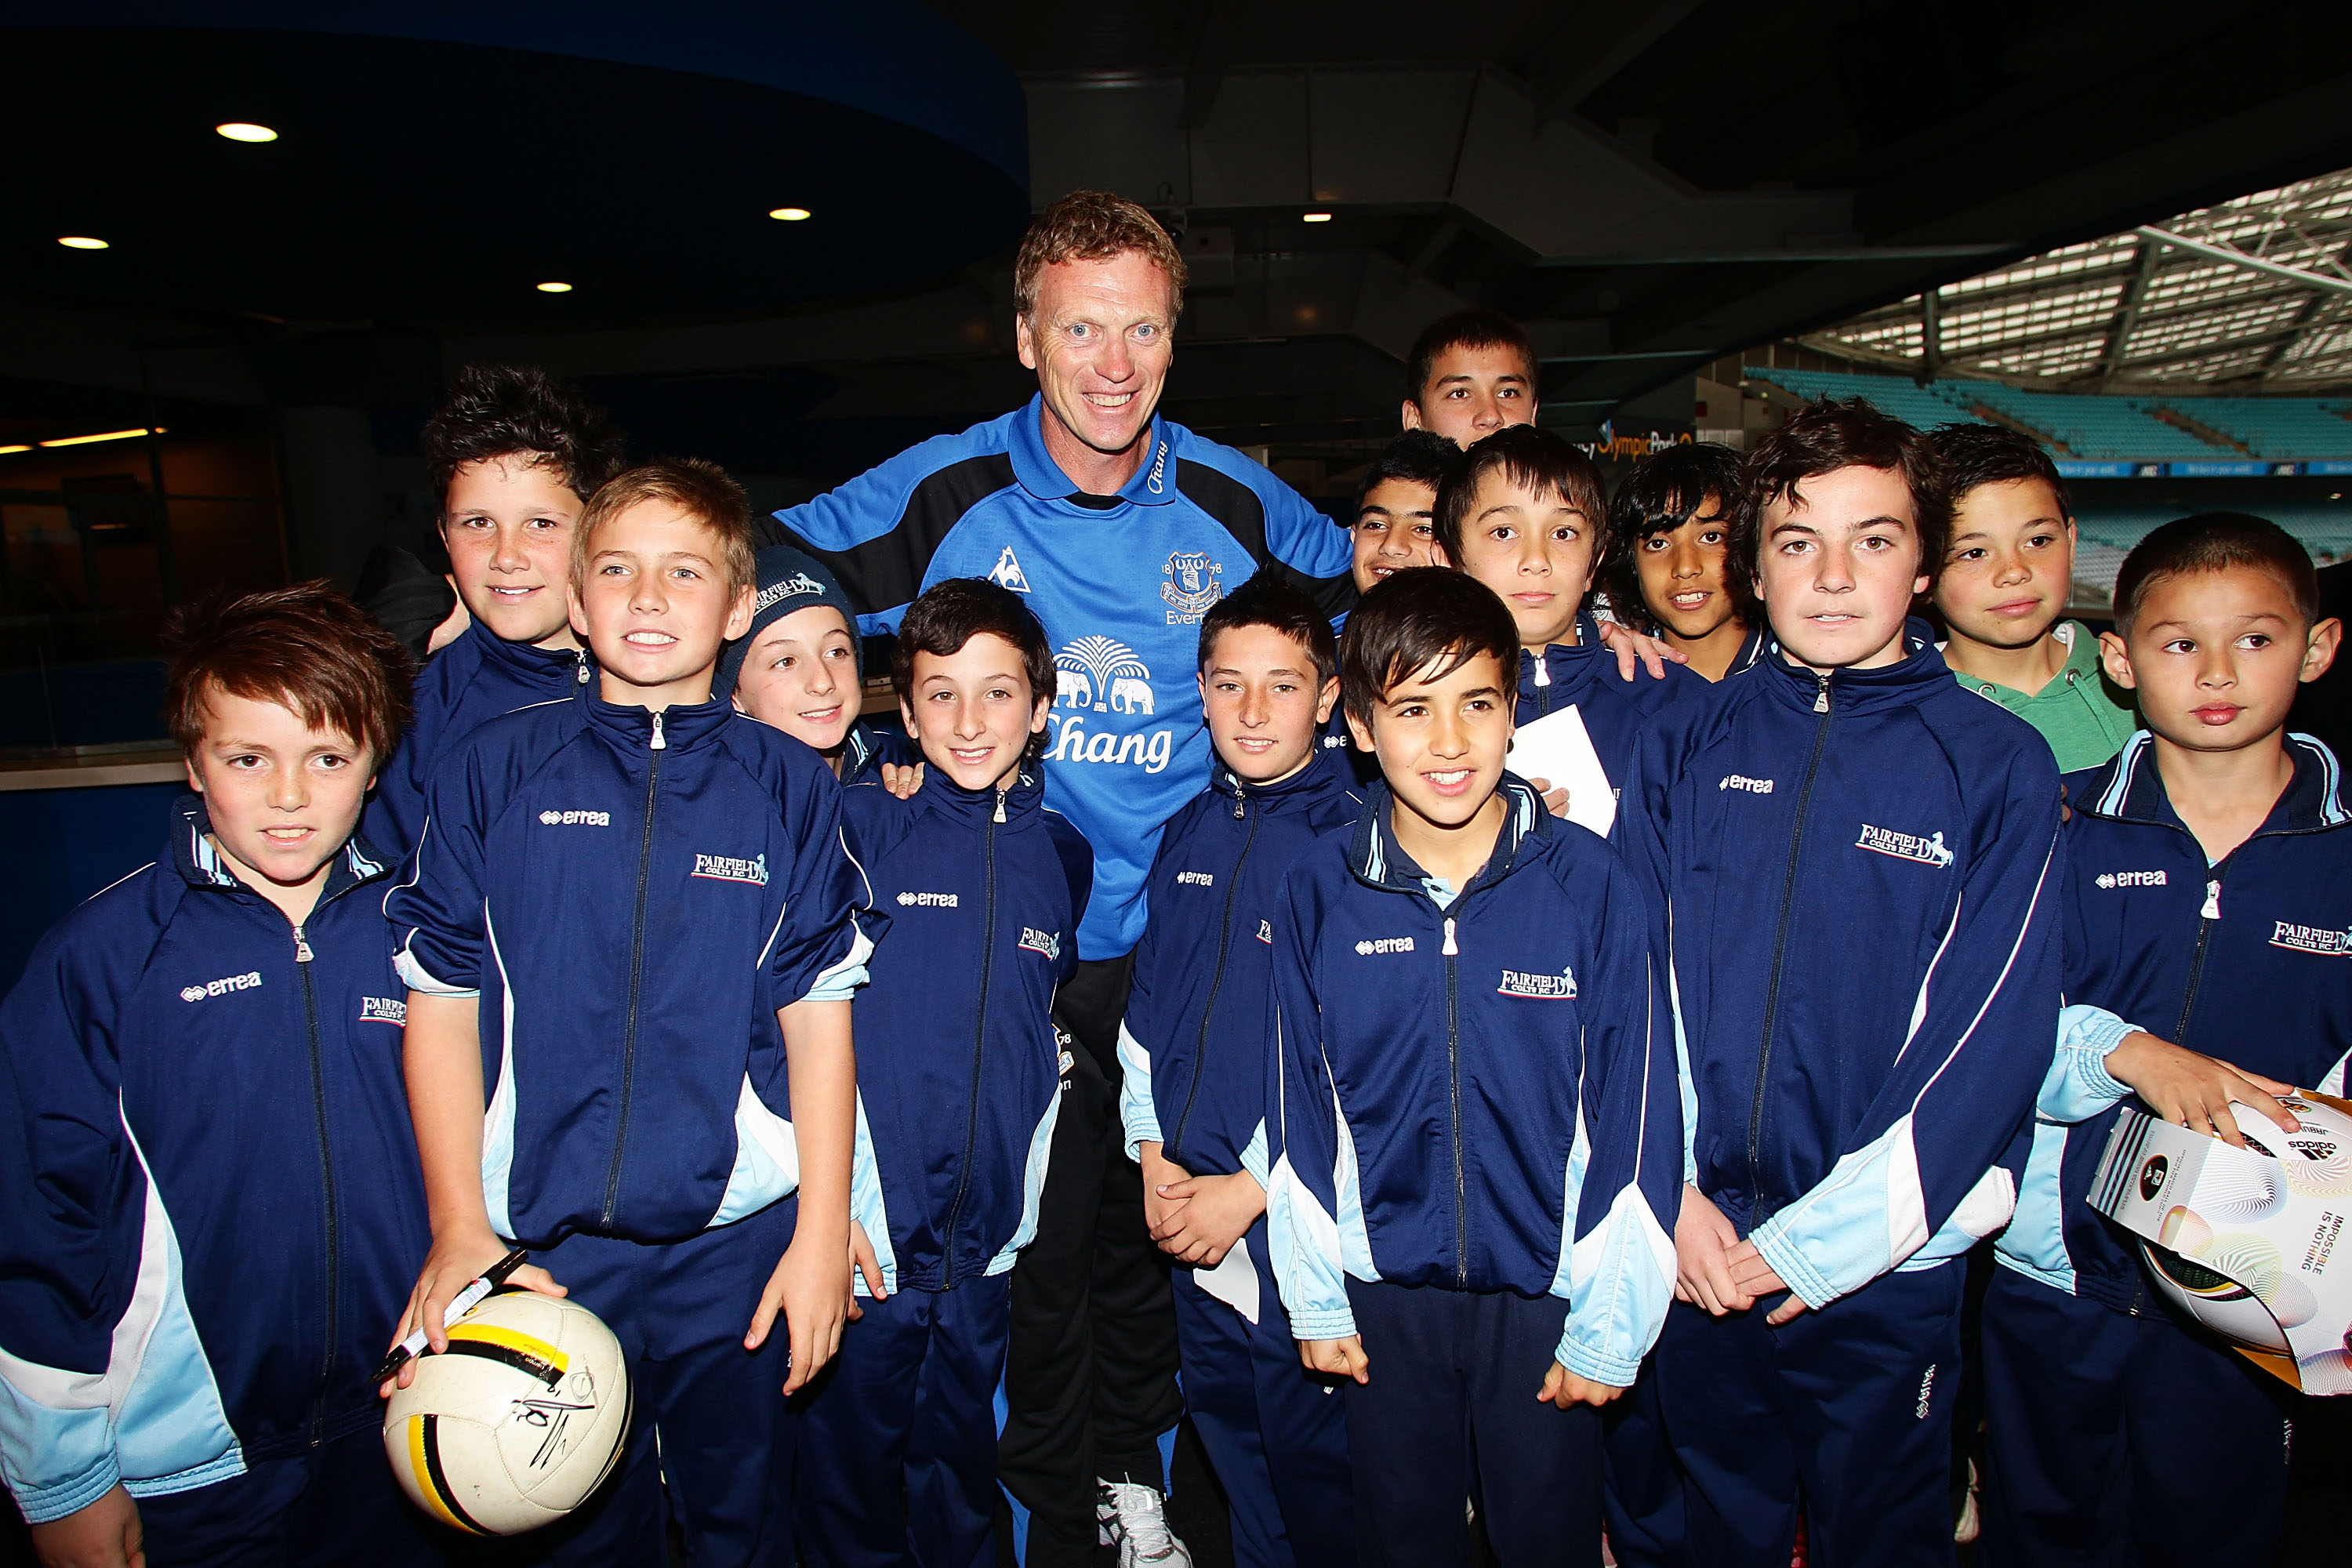 SYDNEY, AUSTRALIA - JULY 05:  Everton FC manager David Moyes poses with young fans during an Everton FC press conference at ANZ Stadium on July 5, 2010 in Sydney, Australia.  (Photo by Matt King/Getty Images)